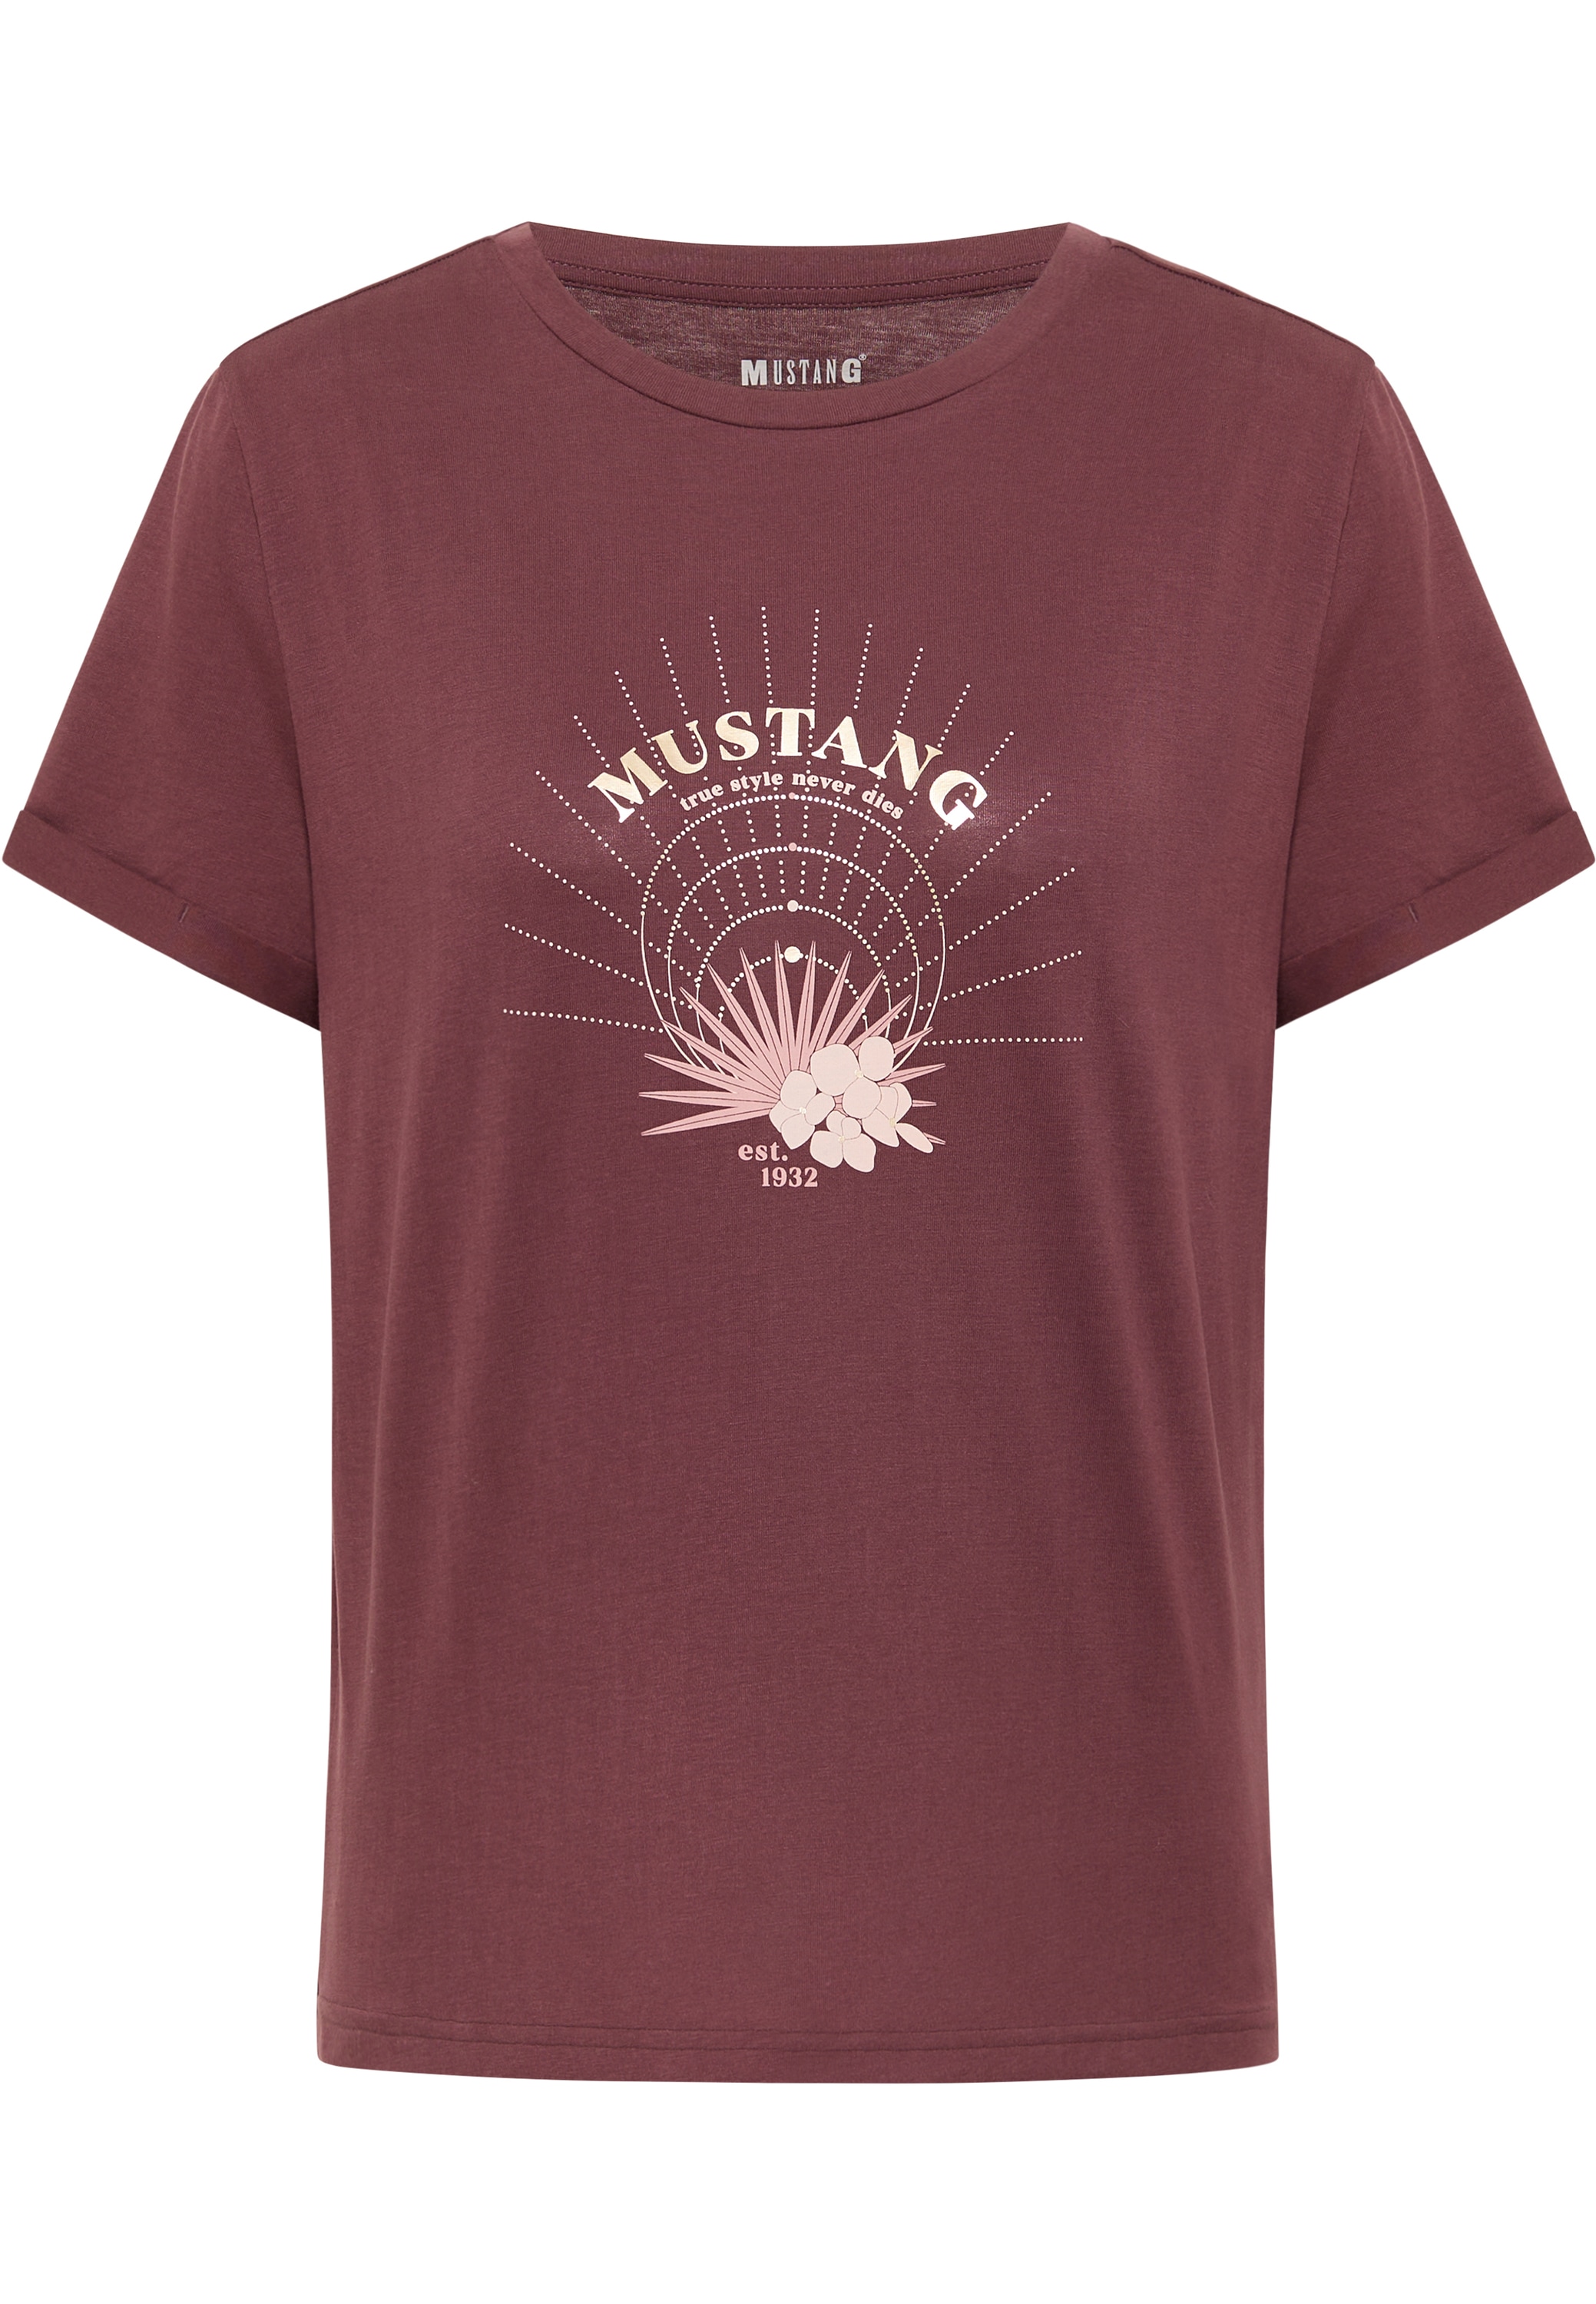 MUSTANG T-Shirt »Style Alina C Foil« bei OTTOversand